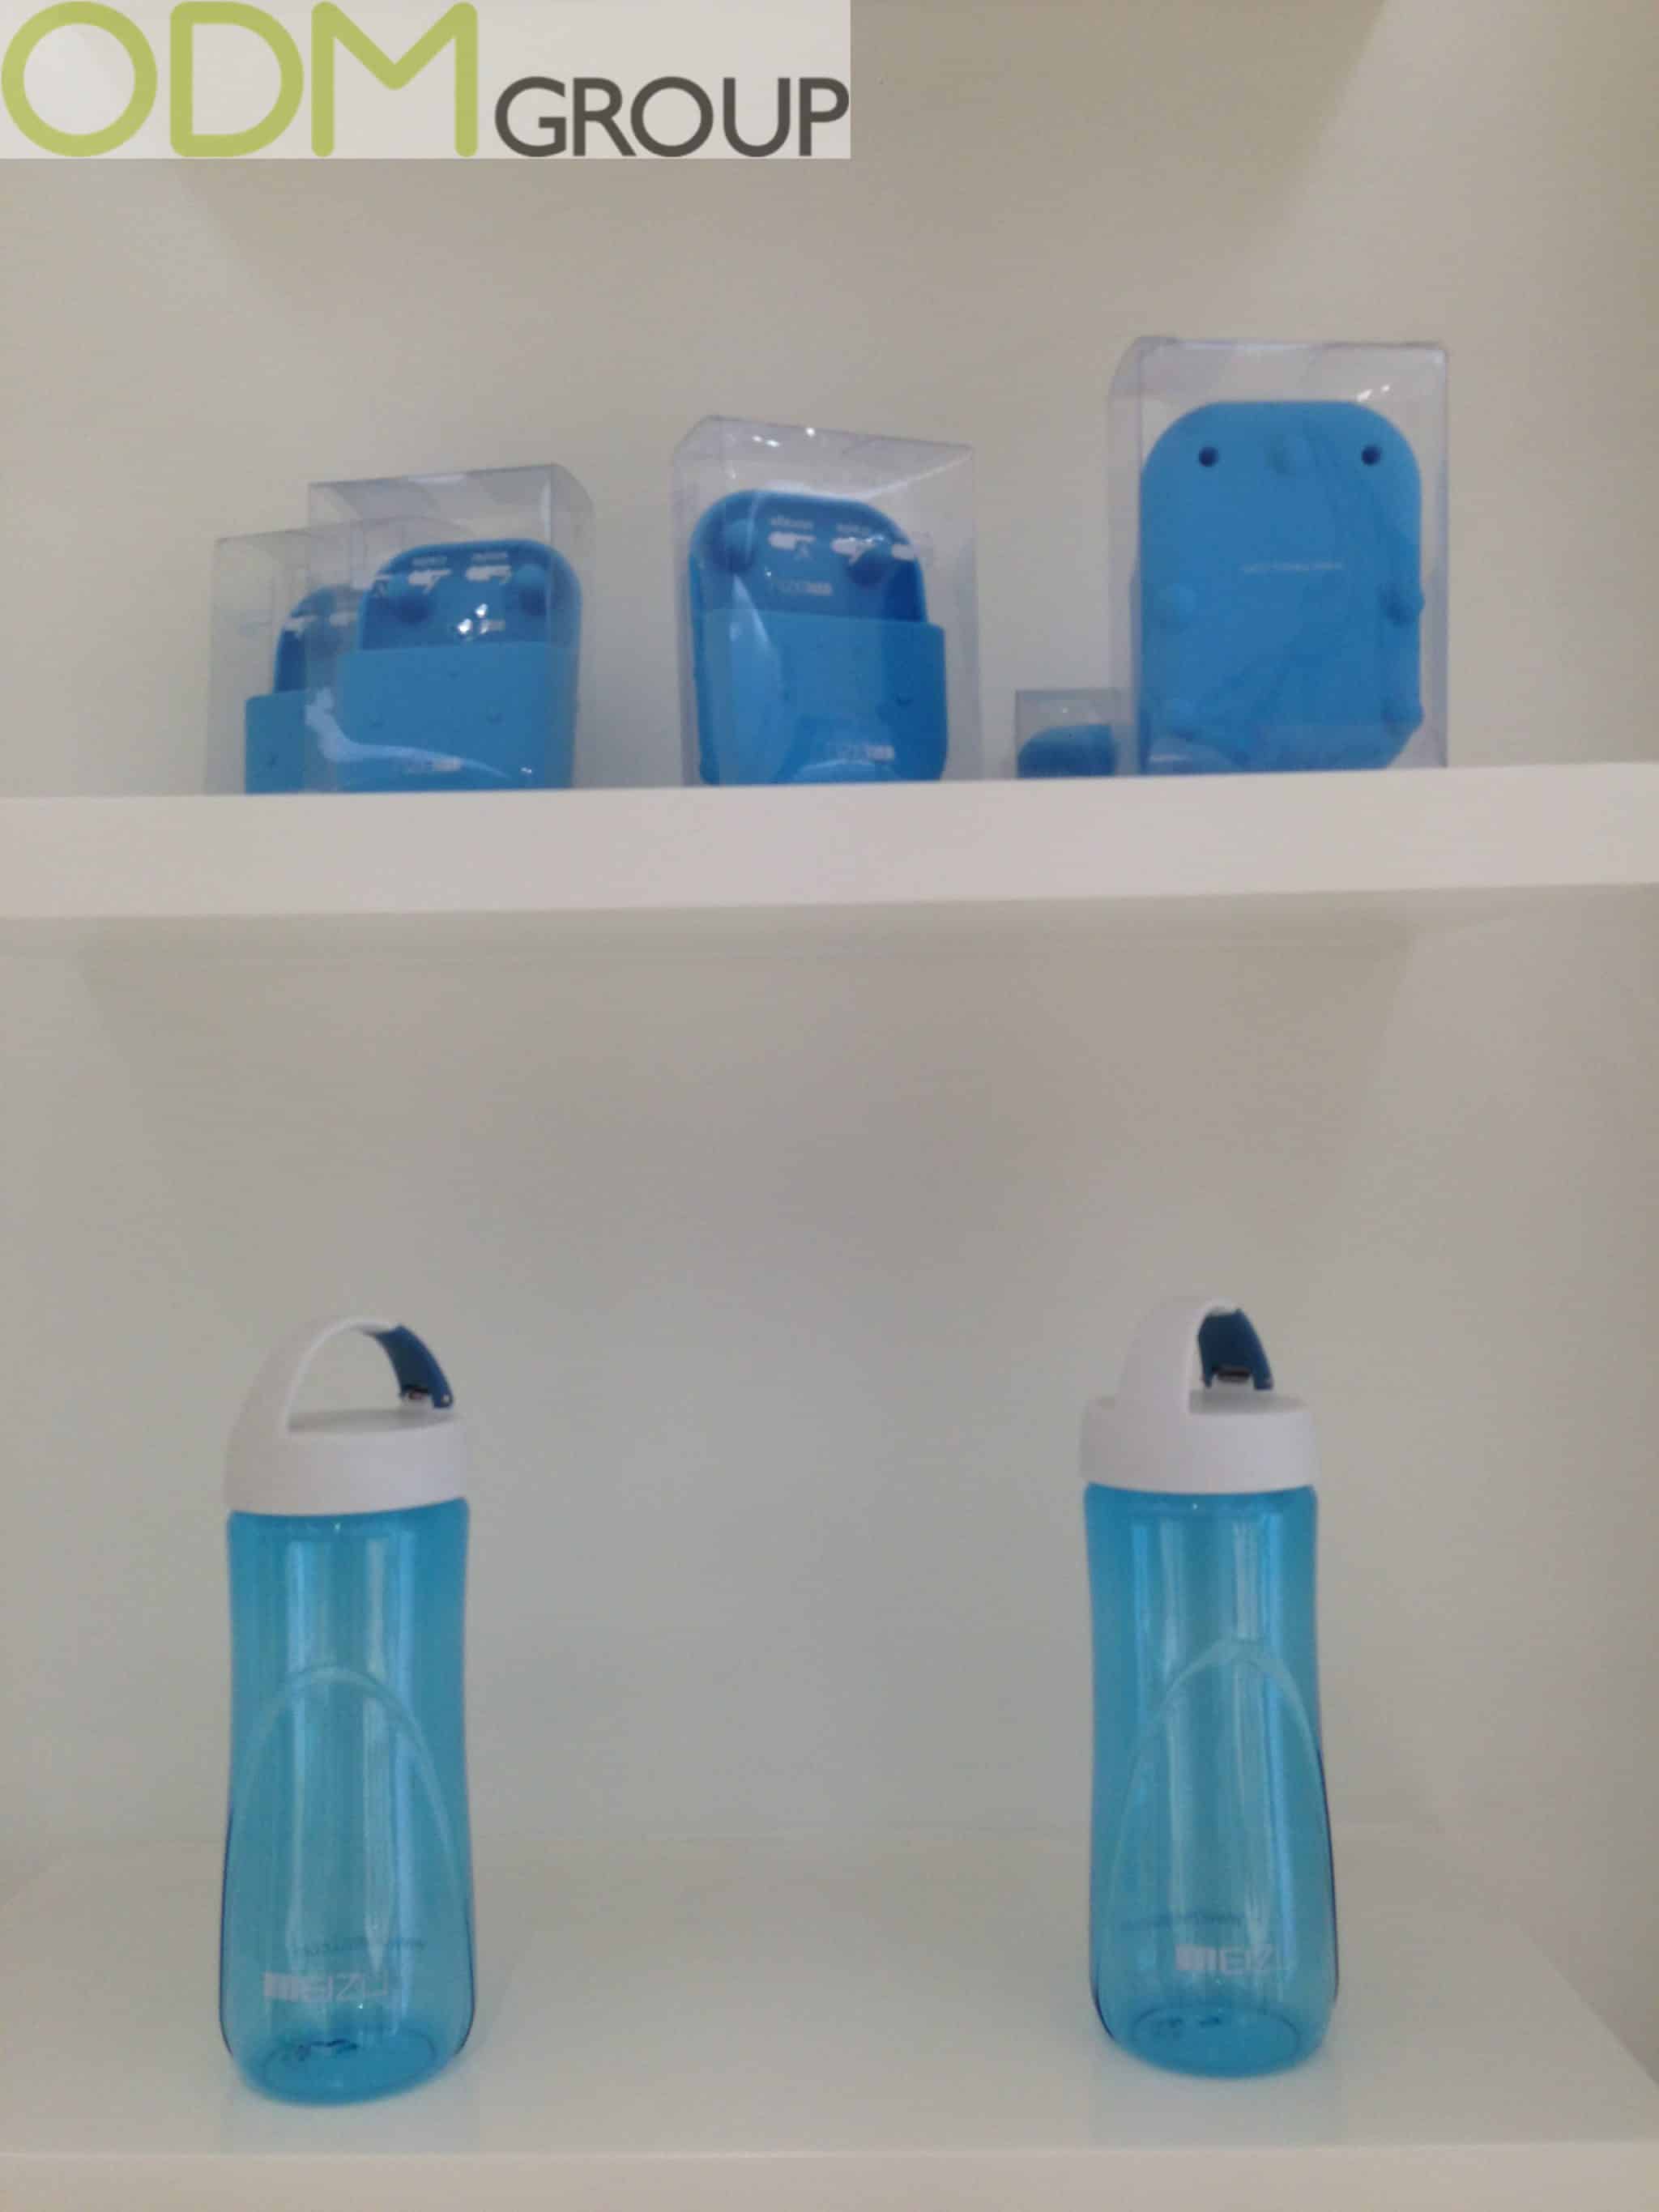 Meizu offers Promotional Products for Brand Activation